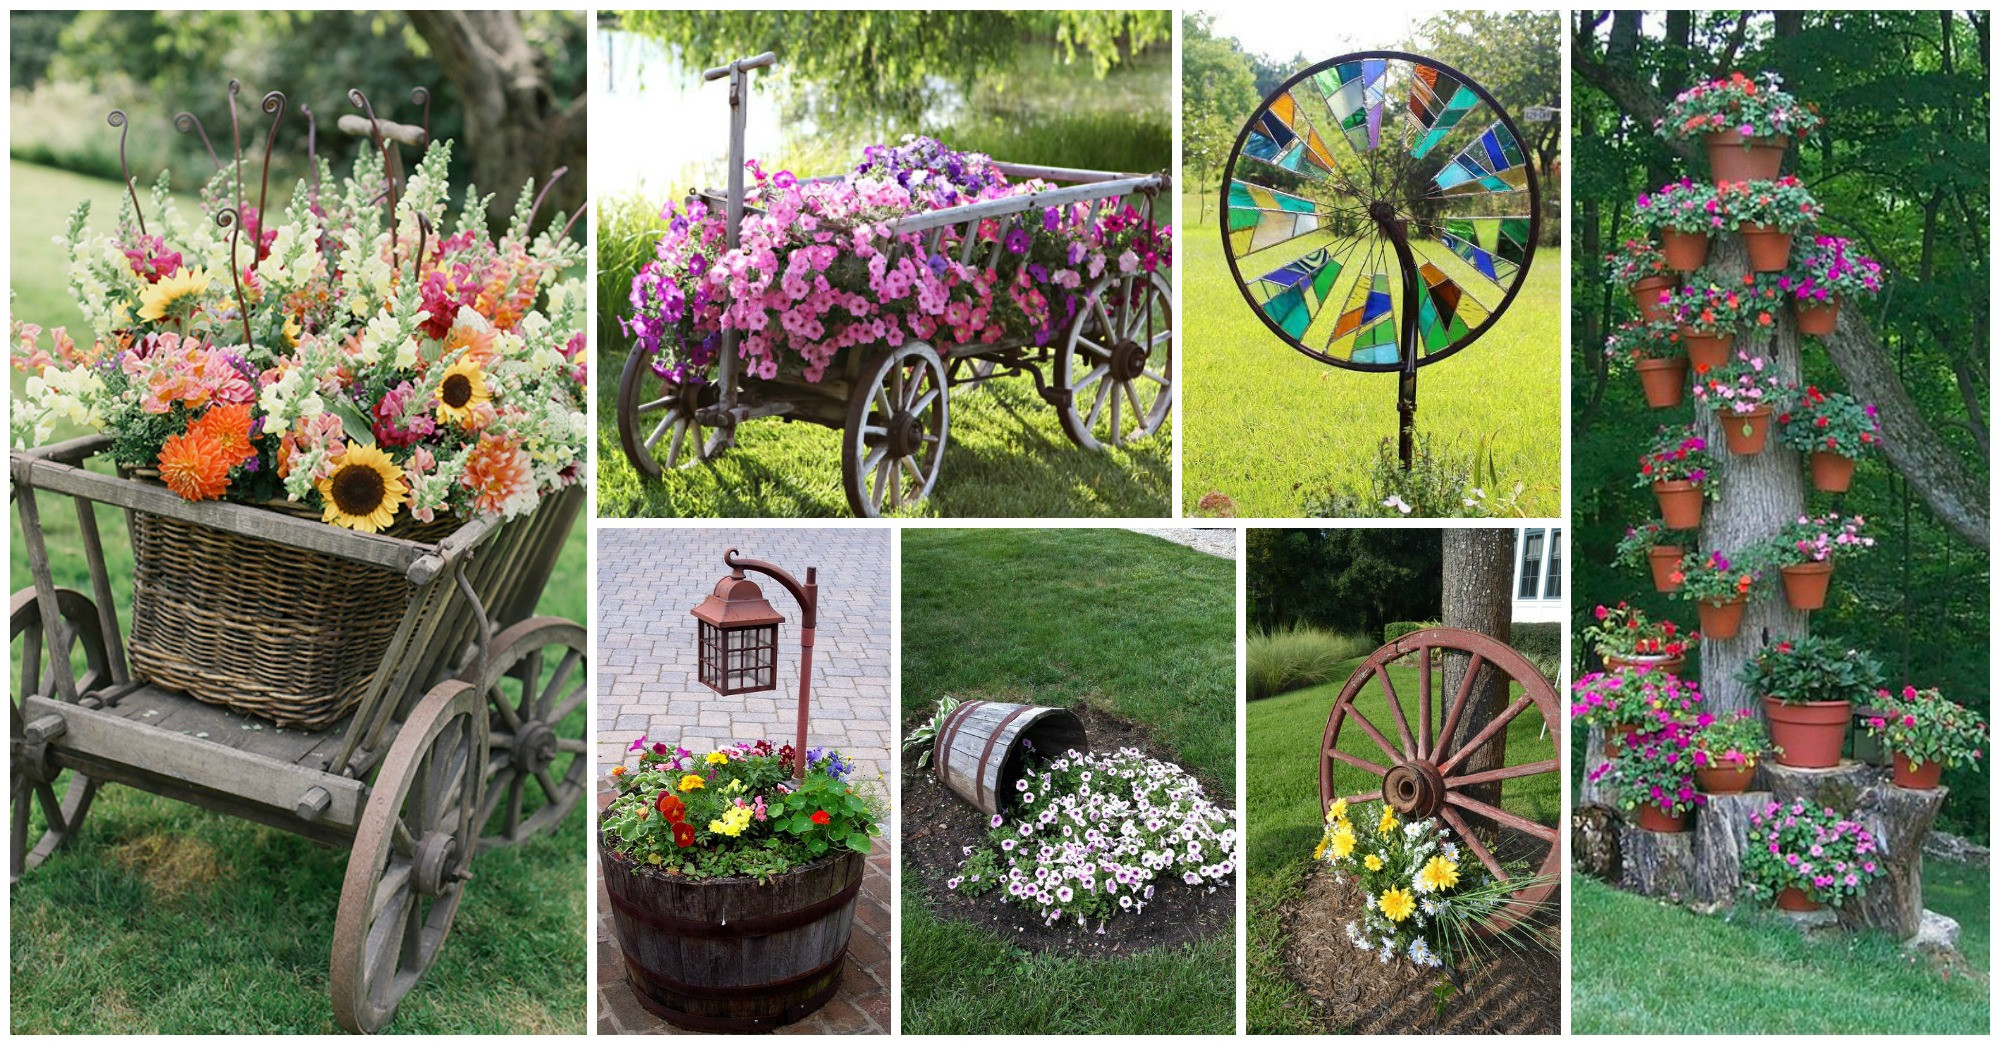 DIY Lawn Decorations
 20 Amazing DIY Projects To Enhance Your Yard Without